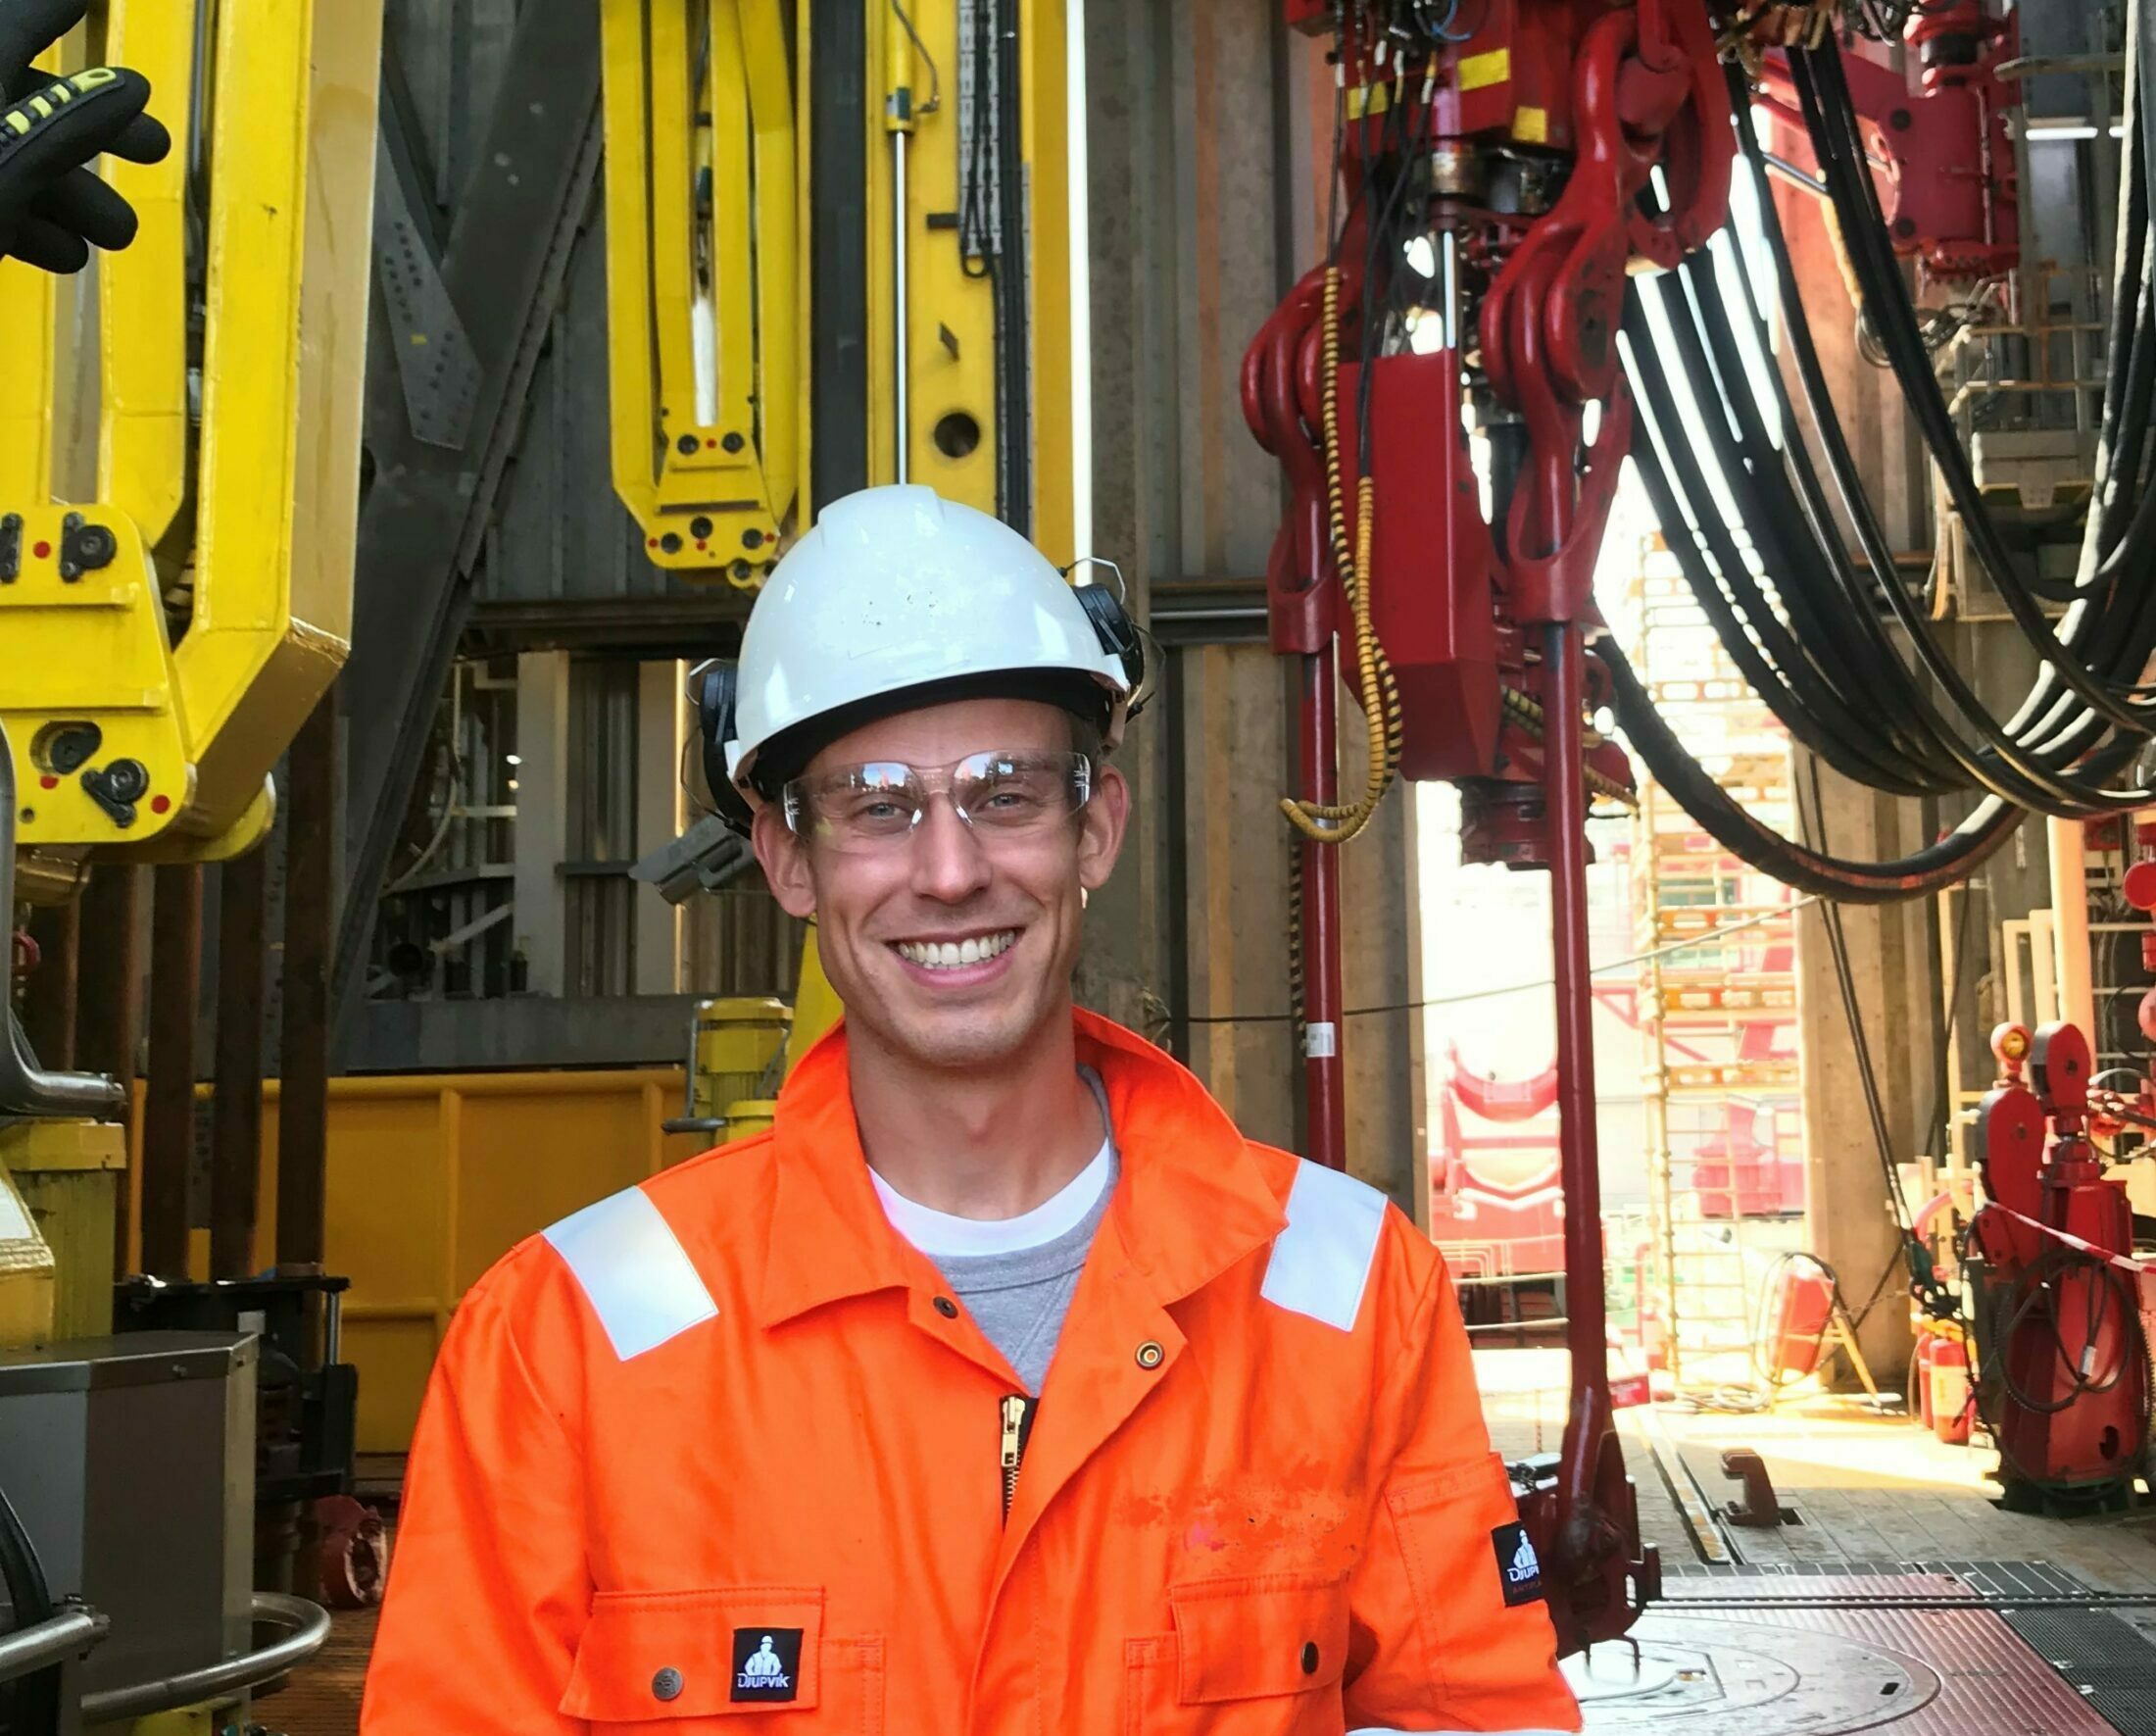 Smiling man on oil rig